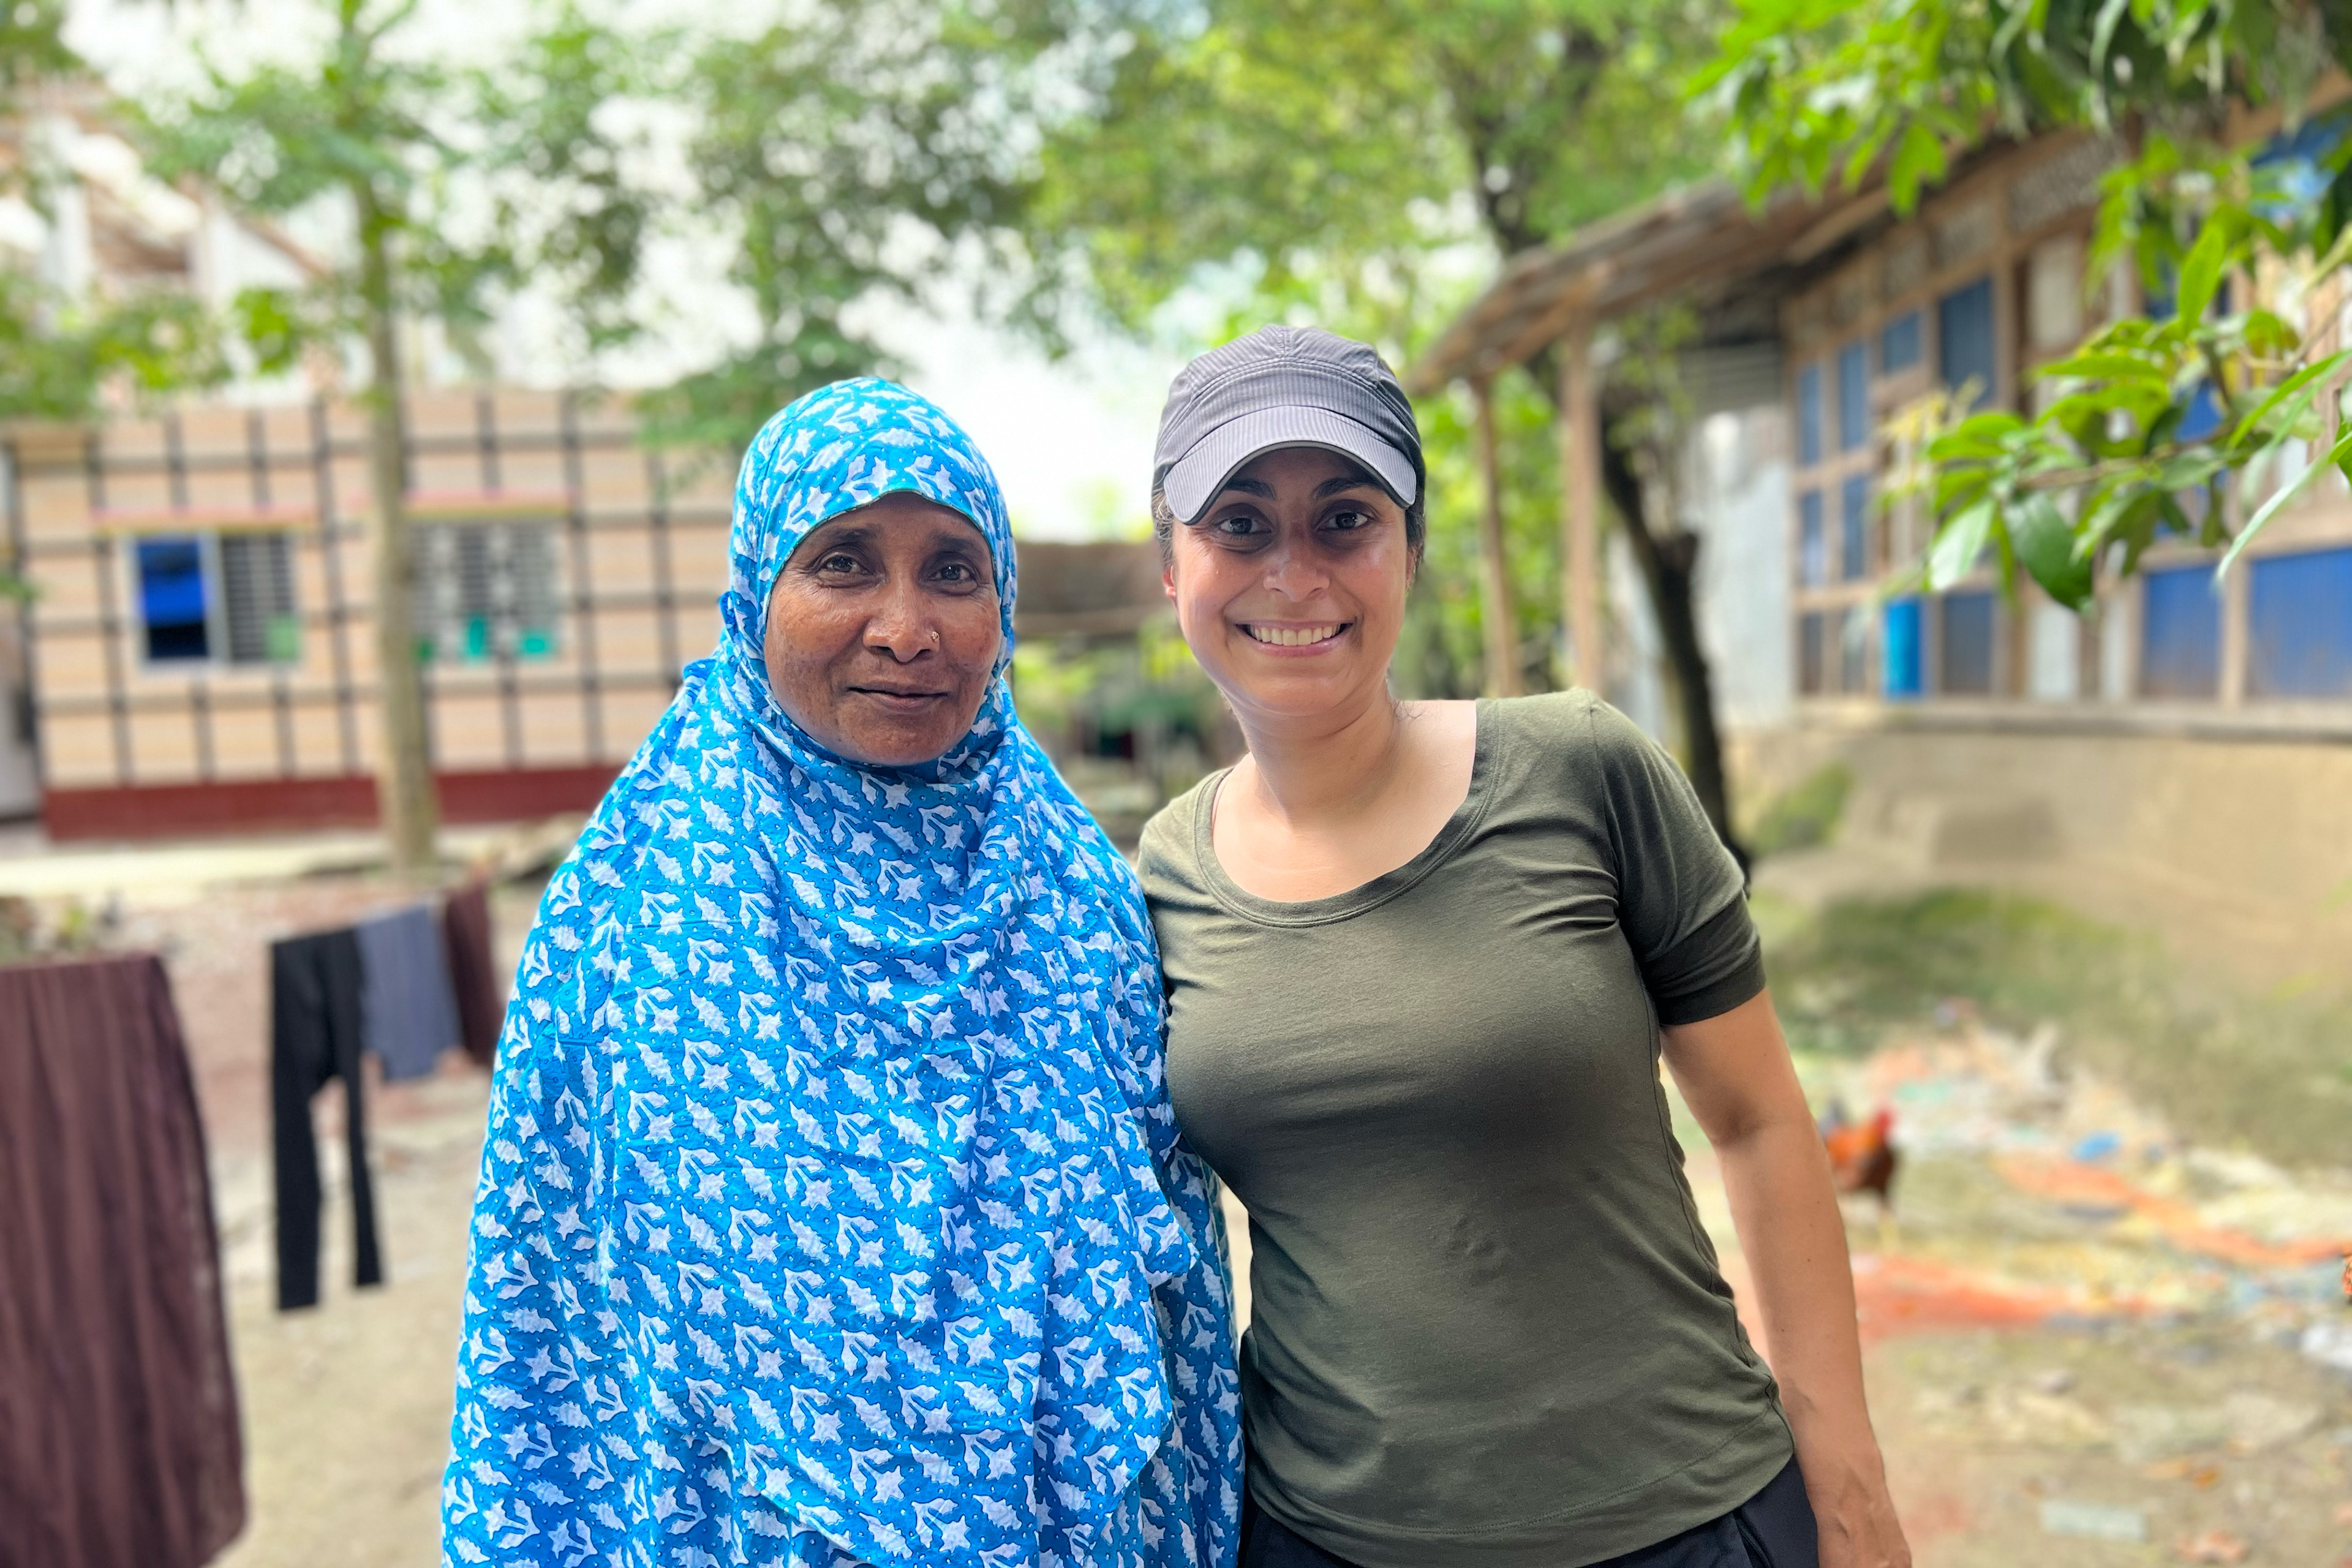 Rahima Banu (left) wears a blue scarf patterned with white flowers. It is draped over her head and body and tucked under her chin. She stands beside Céline Gounder (right), who wears a black baseball cap and green T-shirt. They are in a small courtyard just outside Banu’s home. Laundry dries on a line in the background. Bright green, waxy leaves from growing trees provide shade and softened sunlight.